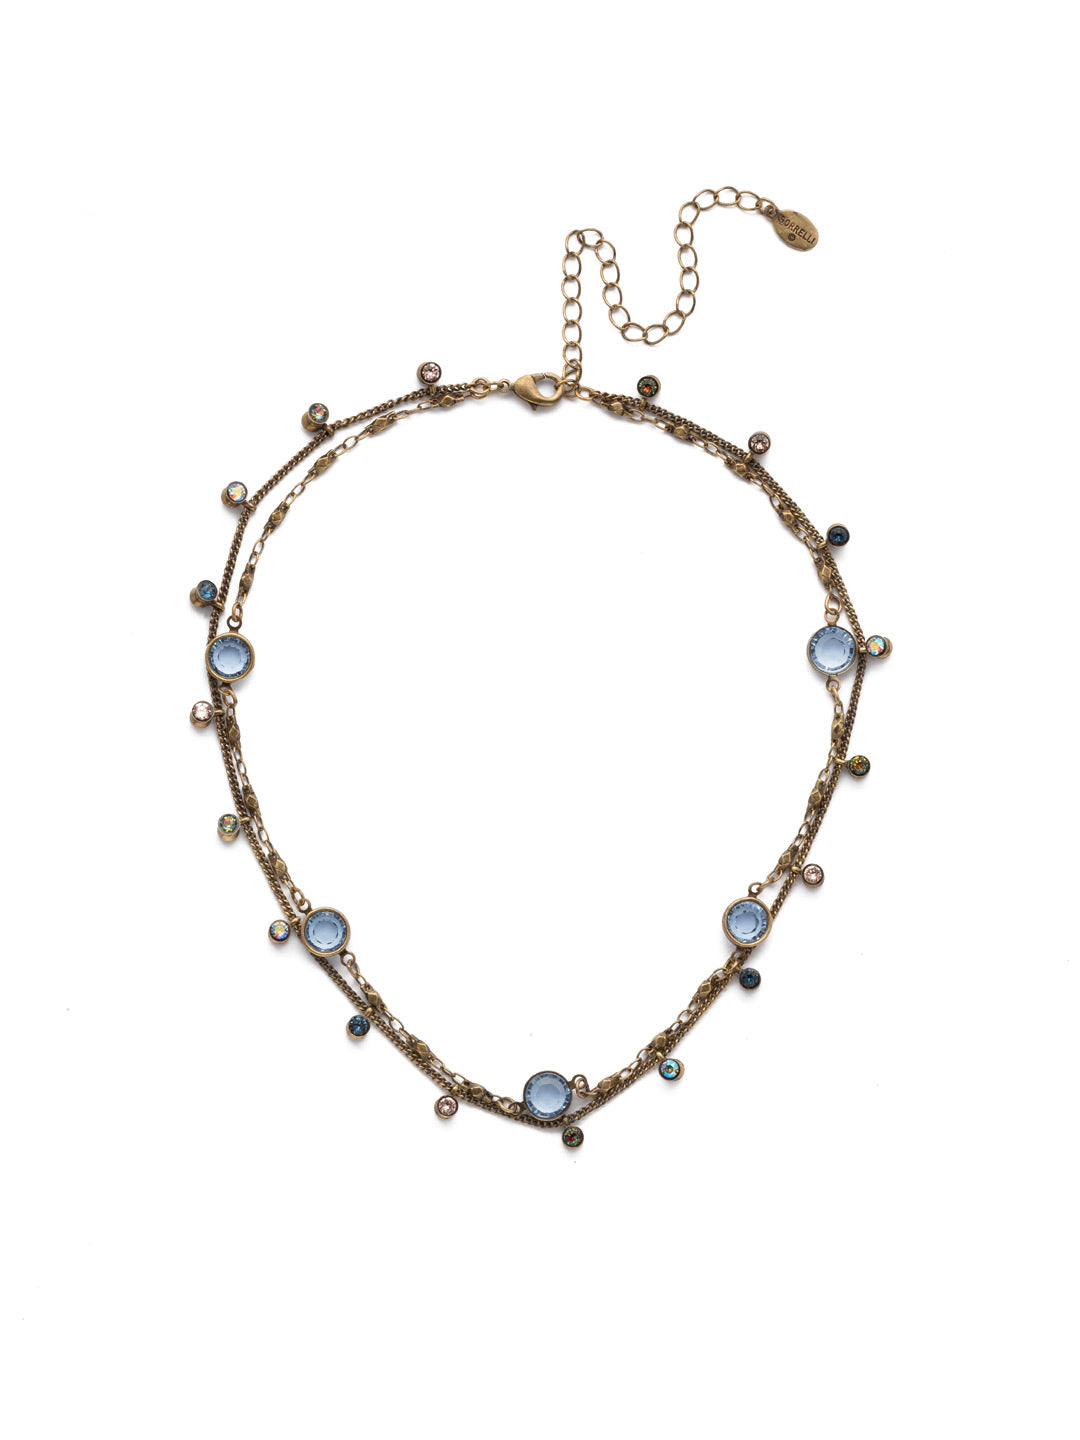 Dewdrop Layered Necklace - NEK36AGSDE - <p>Delicate layers of chain drizzled with droplets of opaque crystals. A quick and easy solution for a layered look with one piece. From Sorrelli's Selvedge Denim collection in our Antique Gold-tone finish.</p>